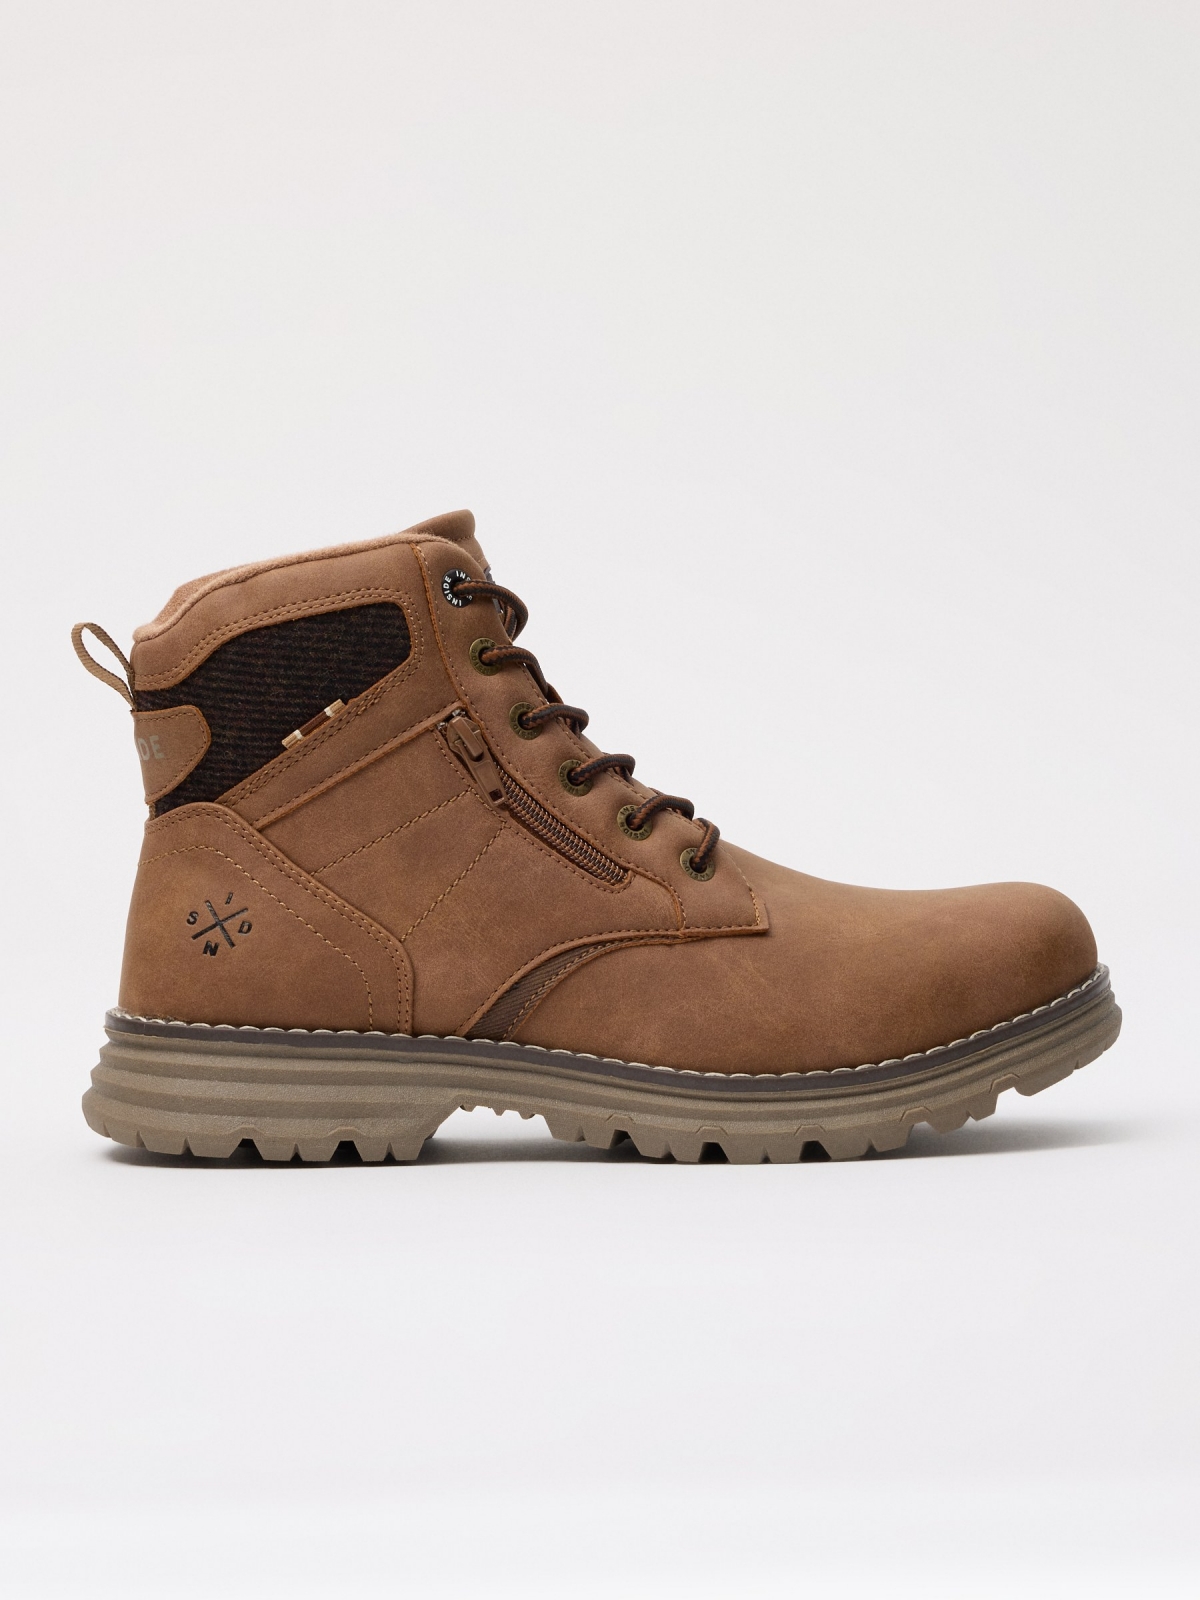 Combined mountaineering boot